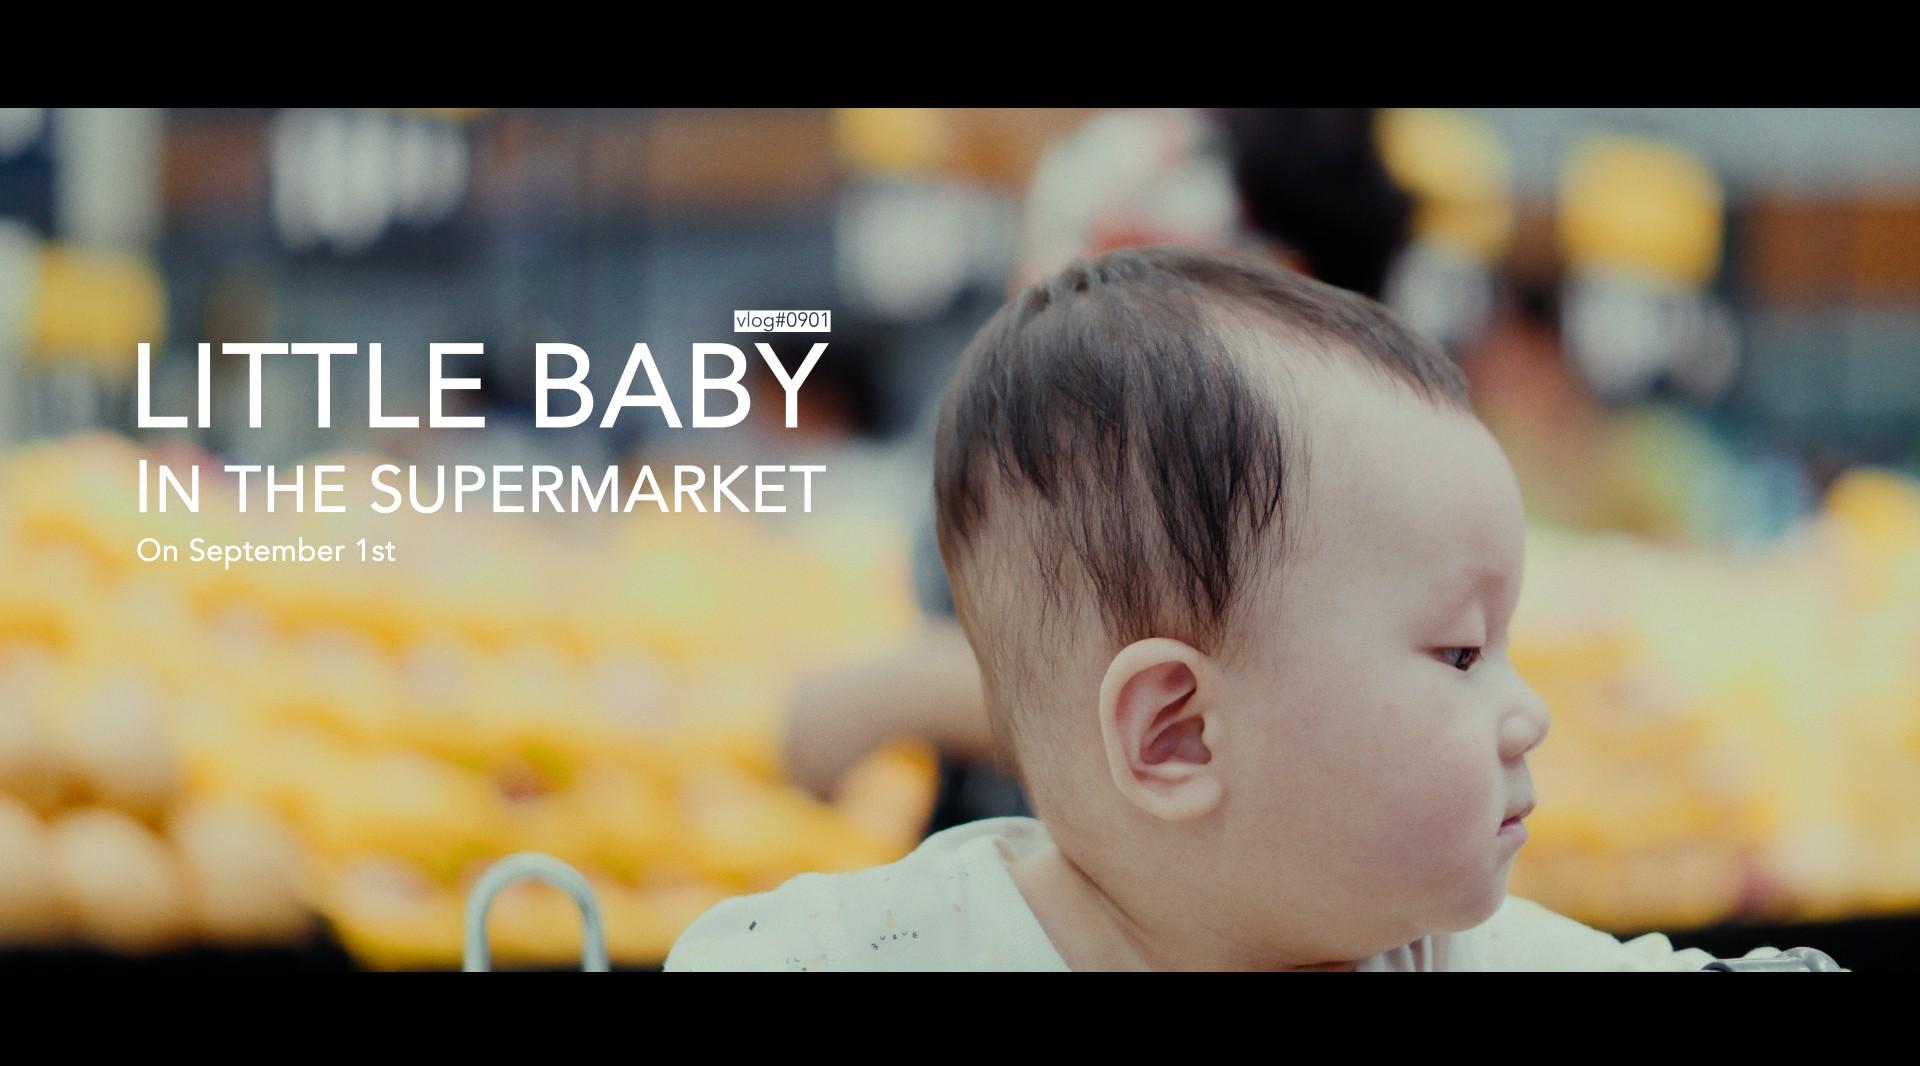 vlog#0901 | Baby in the supermarket